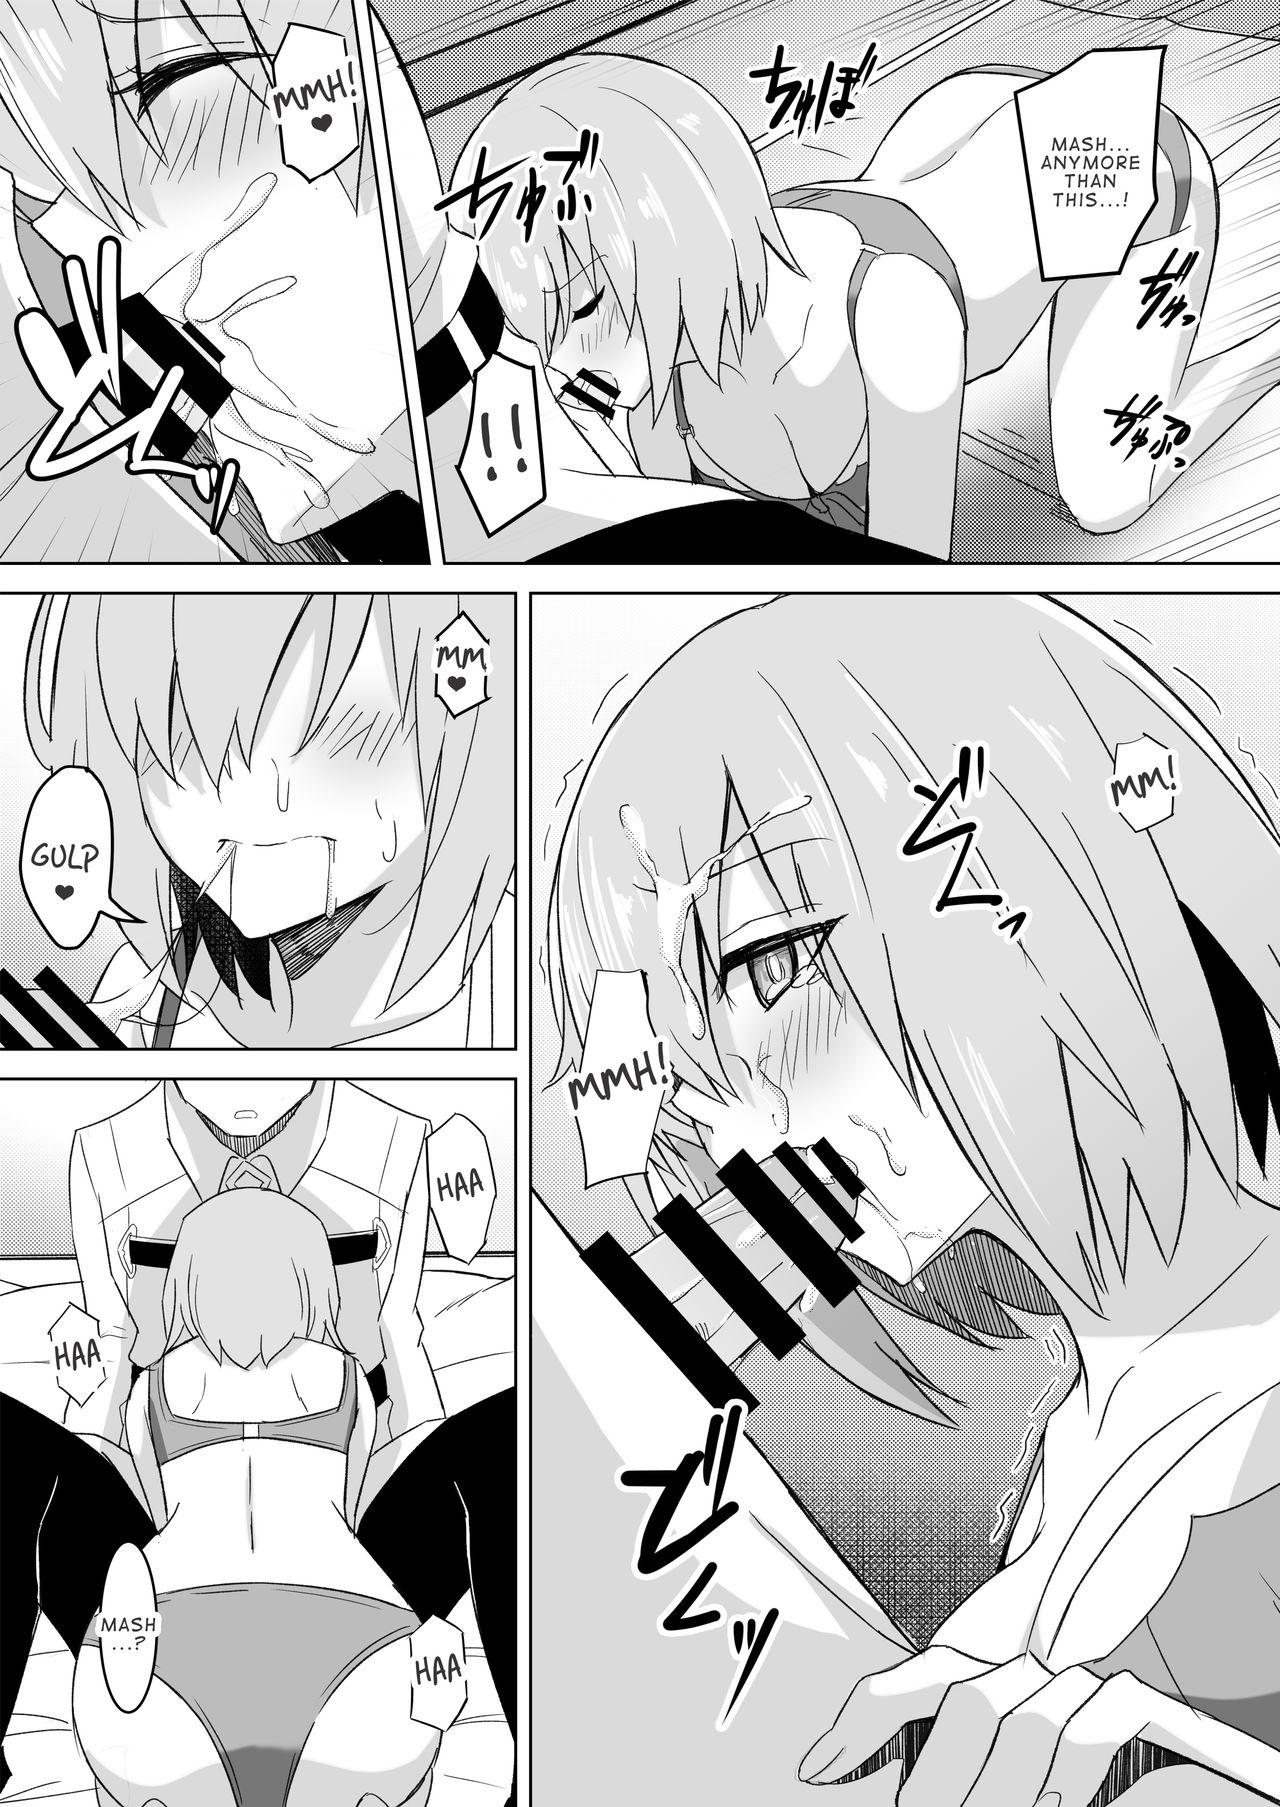 Chicks Mash Was Jealousy - Fate grand order Cameltoe - Page 8